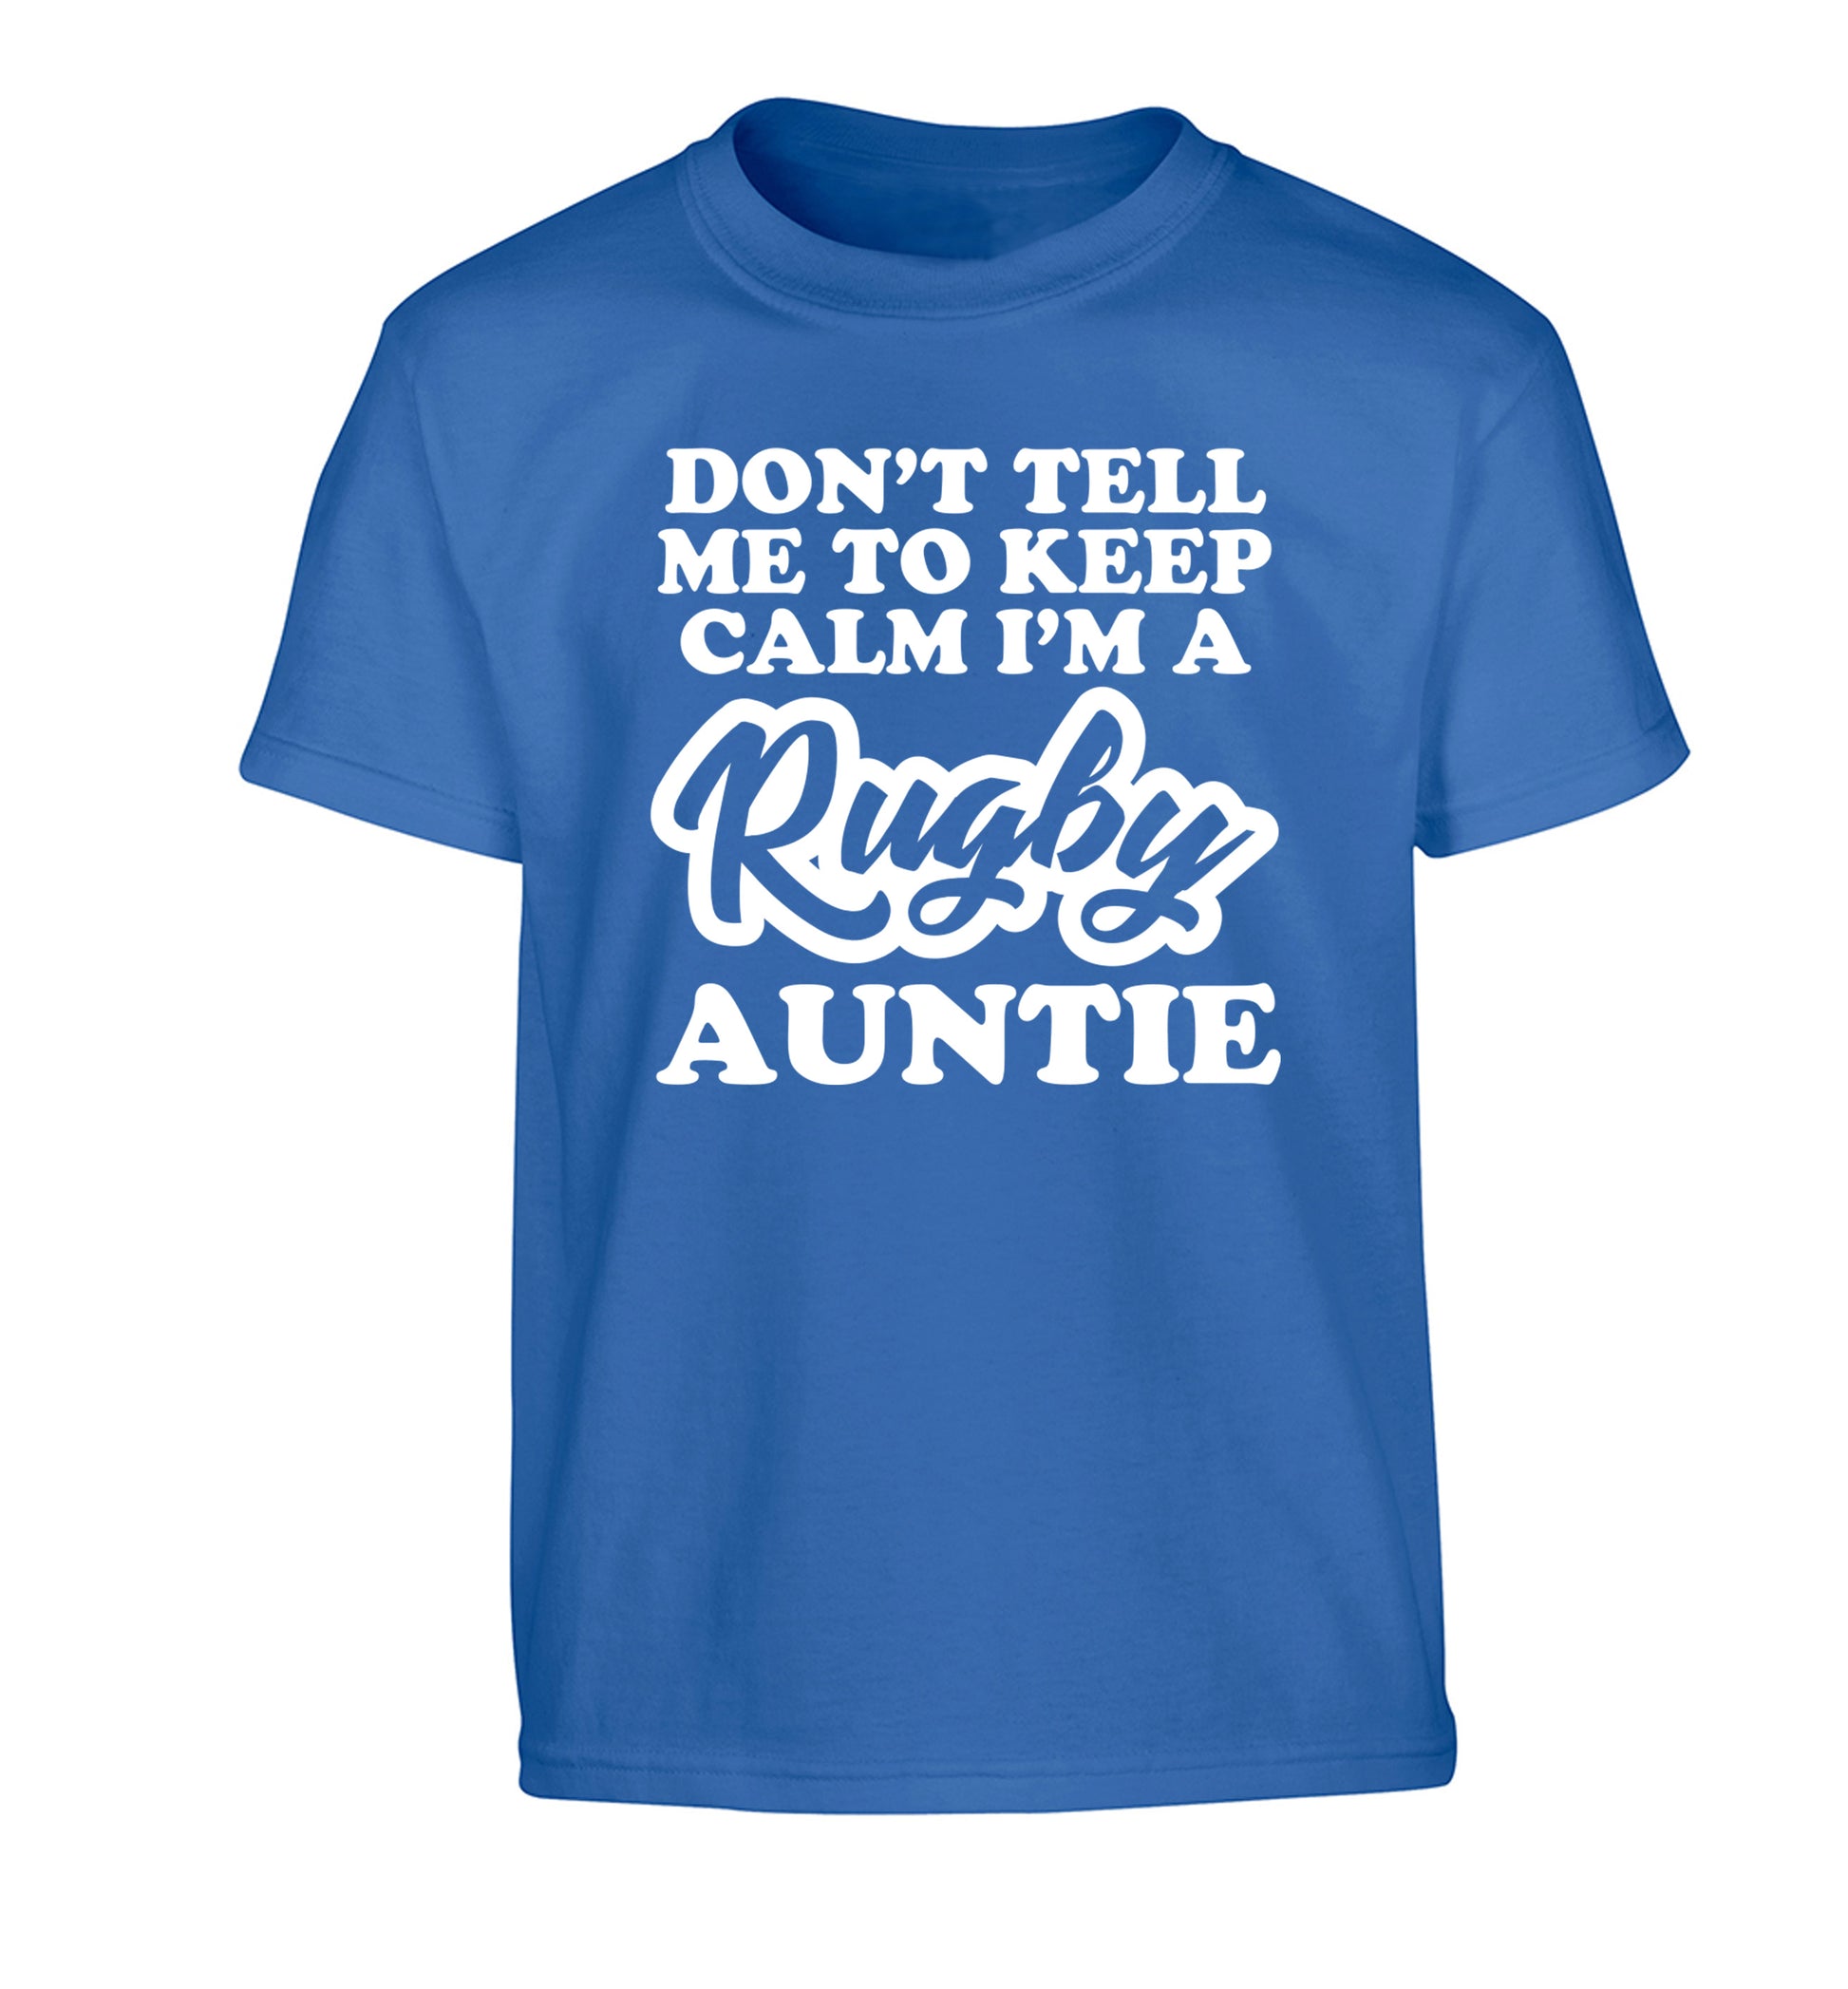 Don't tell me keep calm I'm a rugby auntie Children's blue Tshirt 12-13 Years